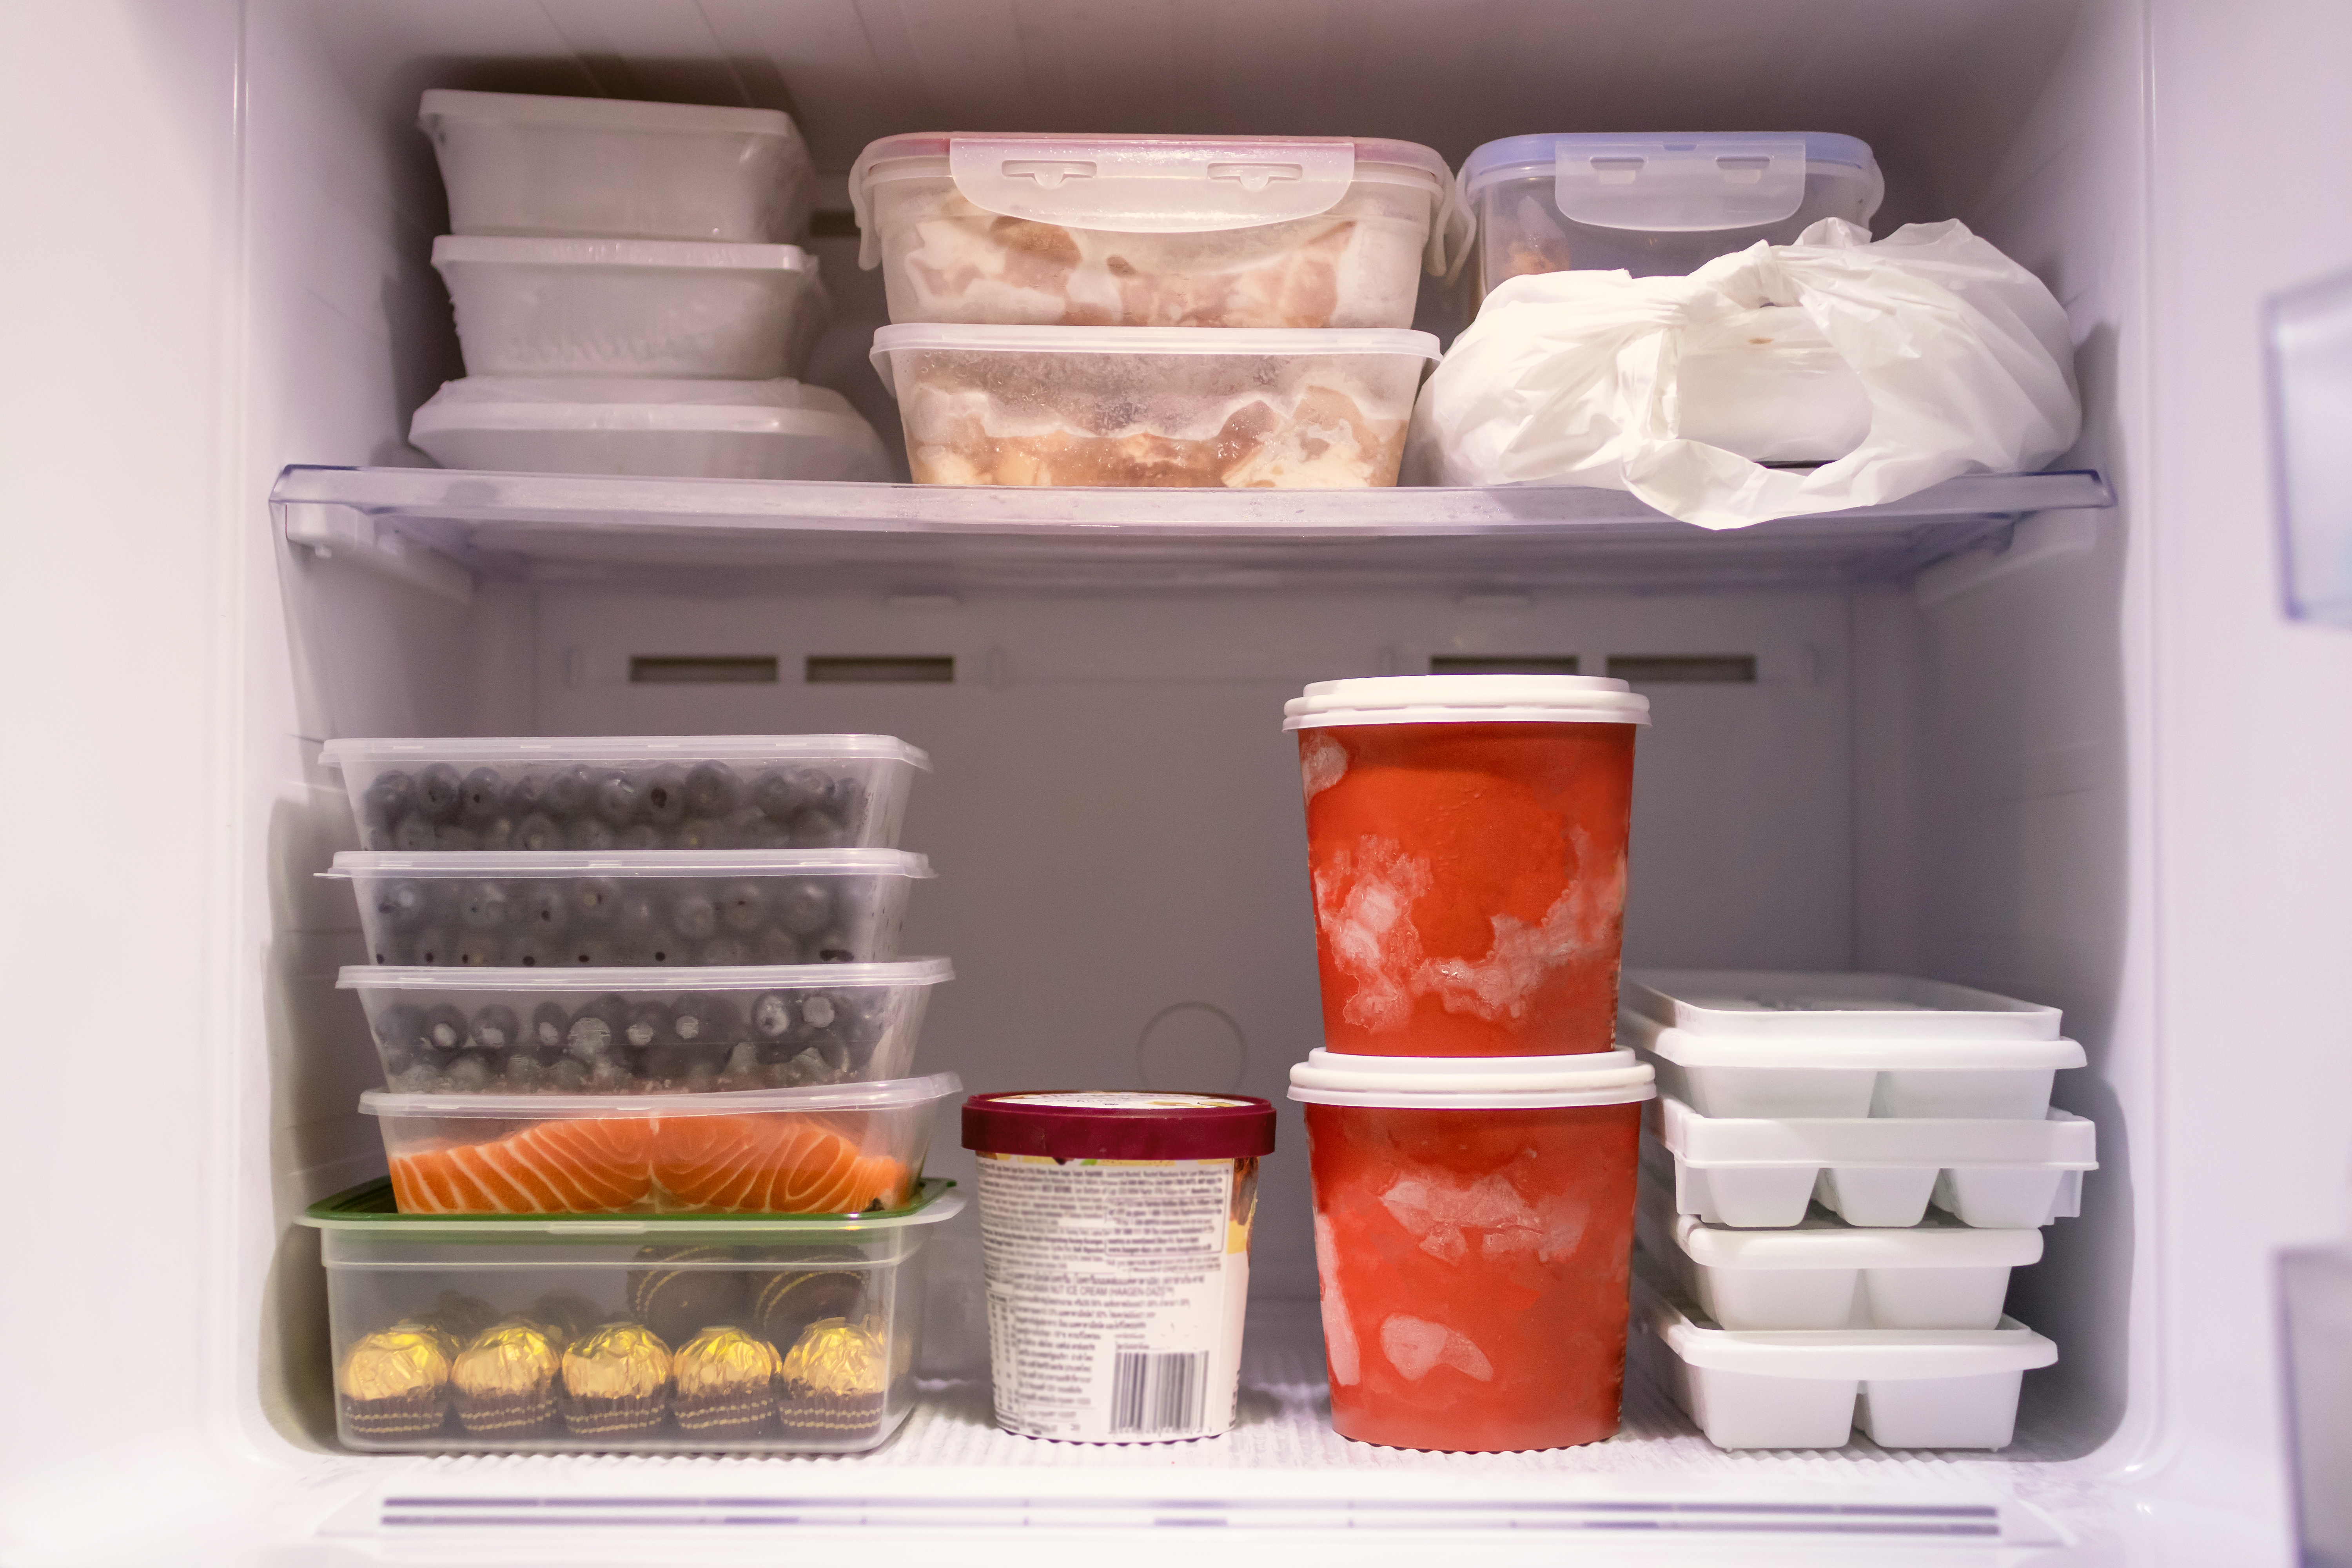 Freezing food could be key to keeping shopping bills down, according to an expert